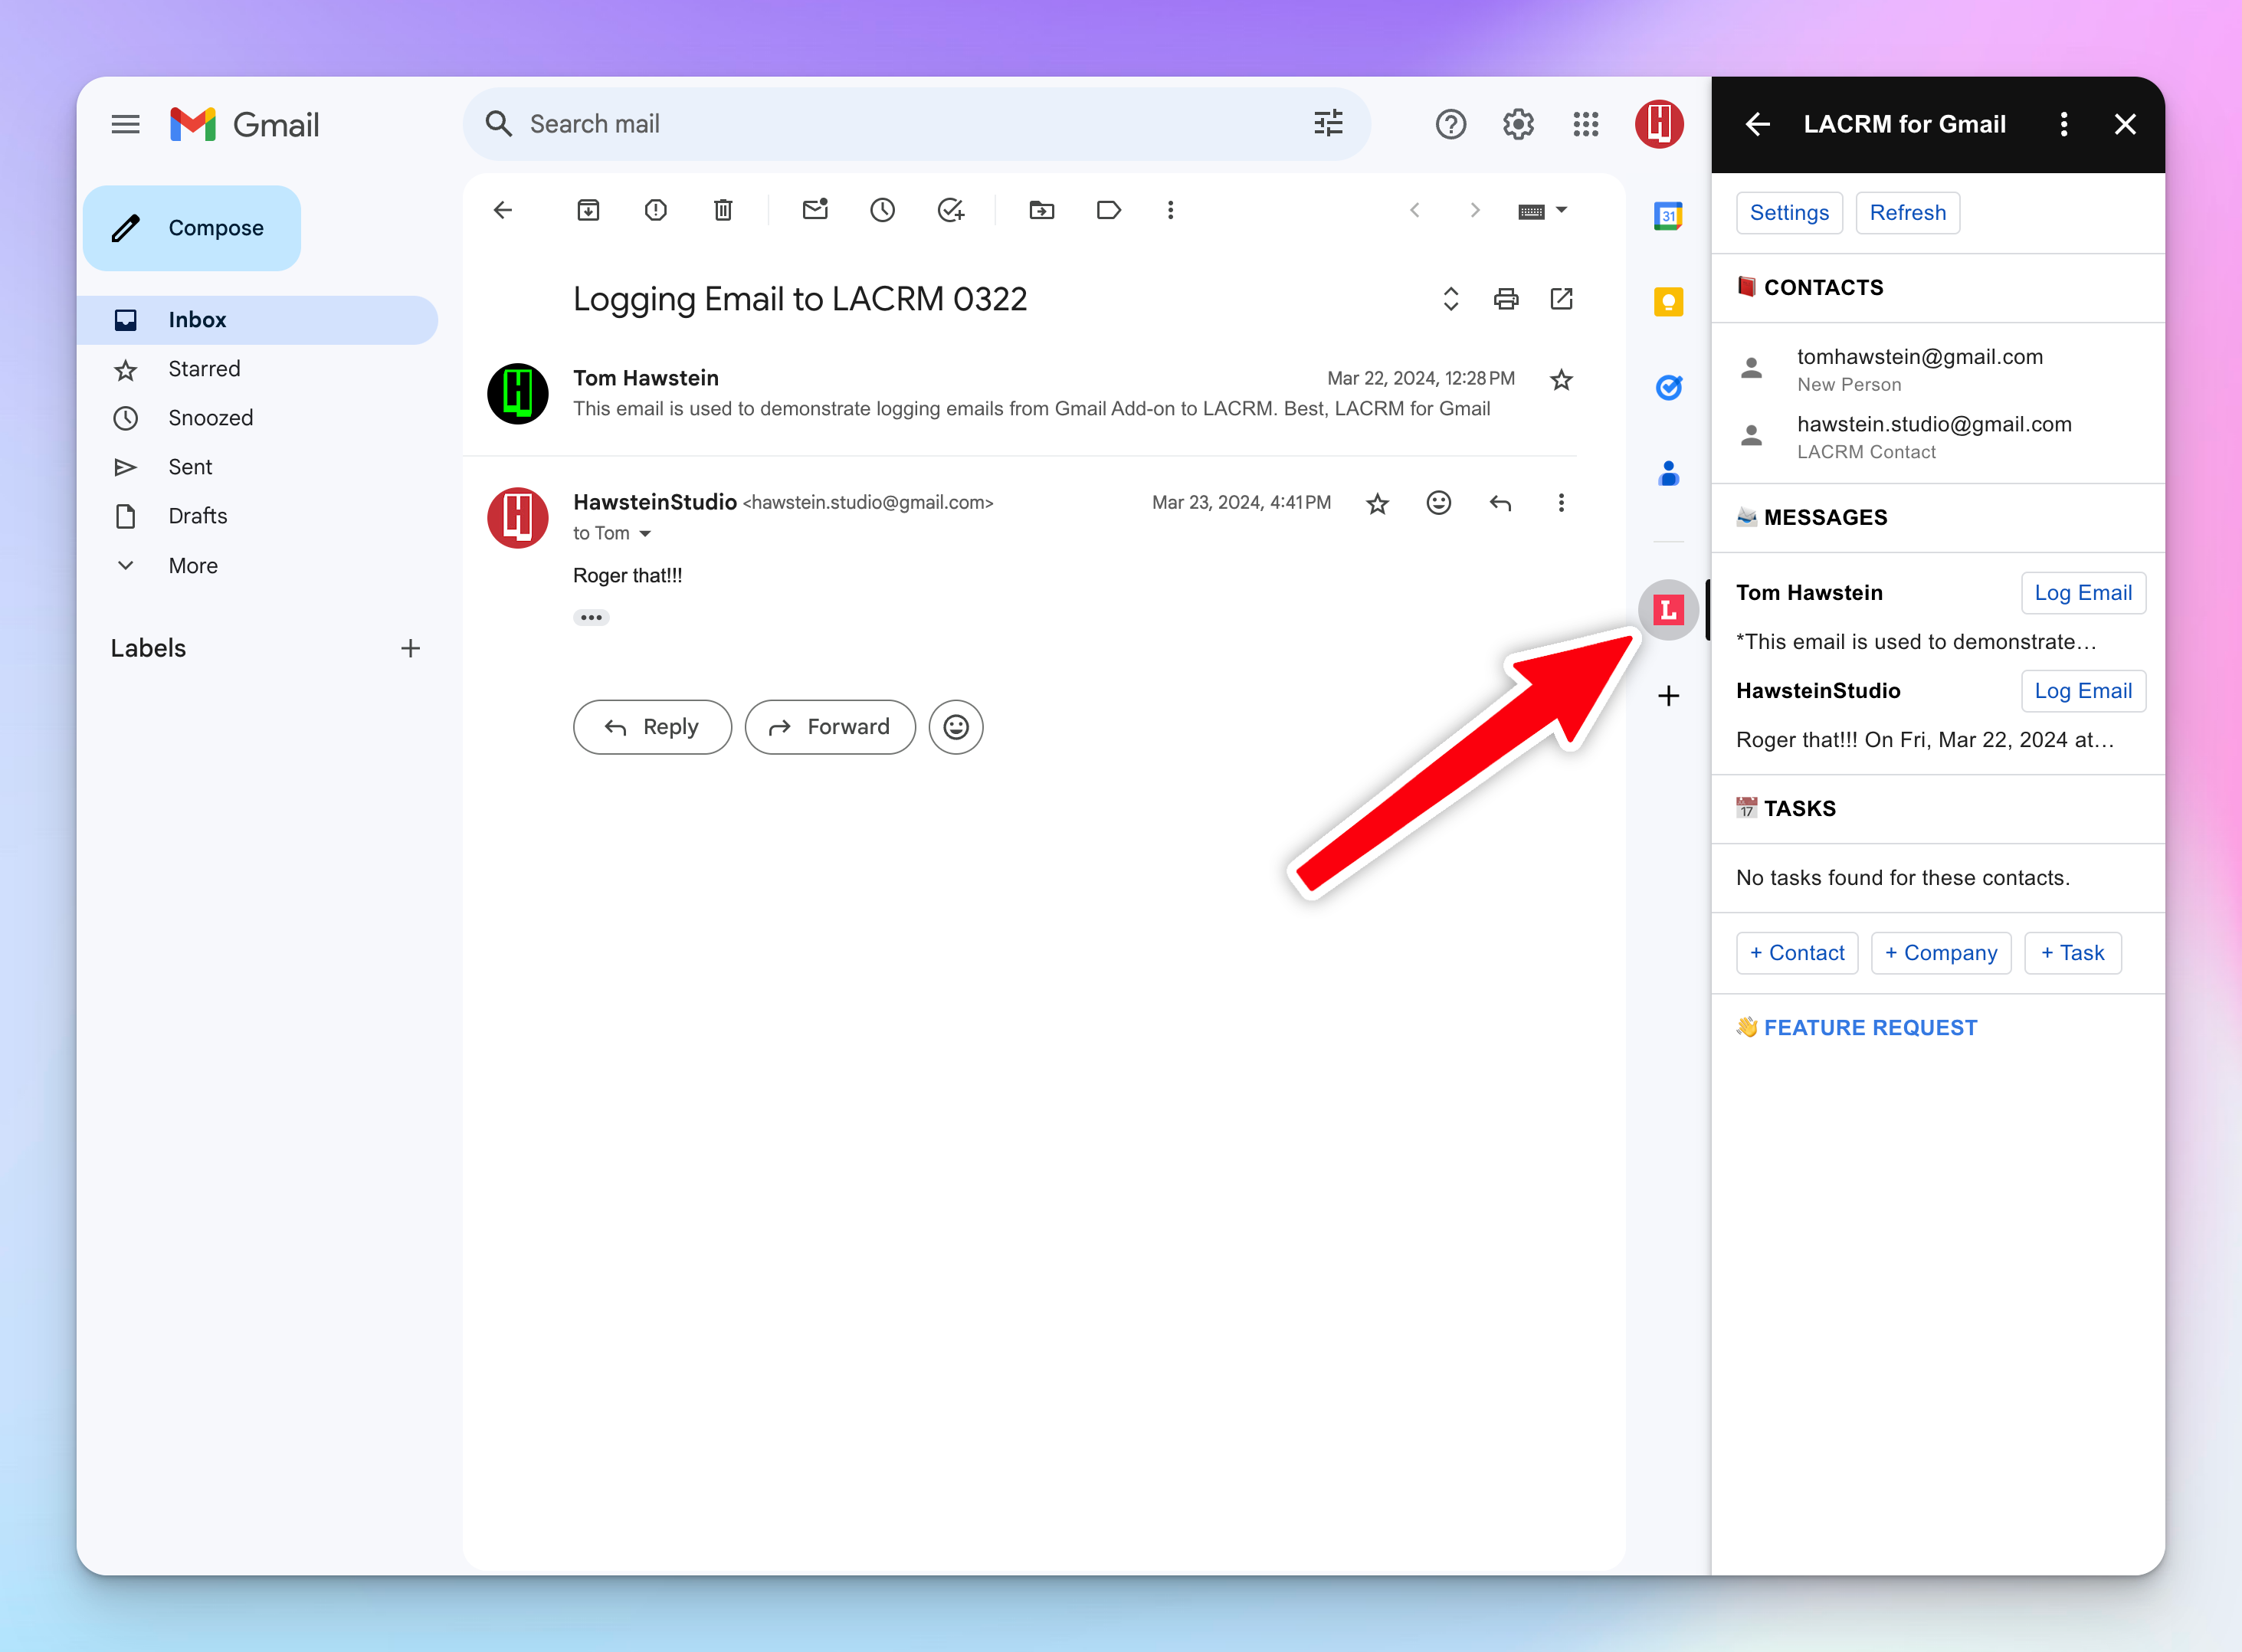 Launch LACRM for Gmail